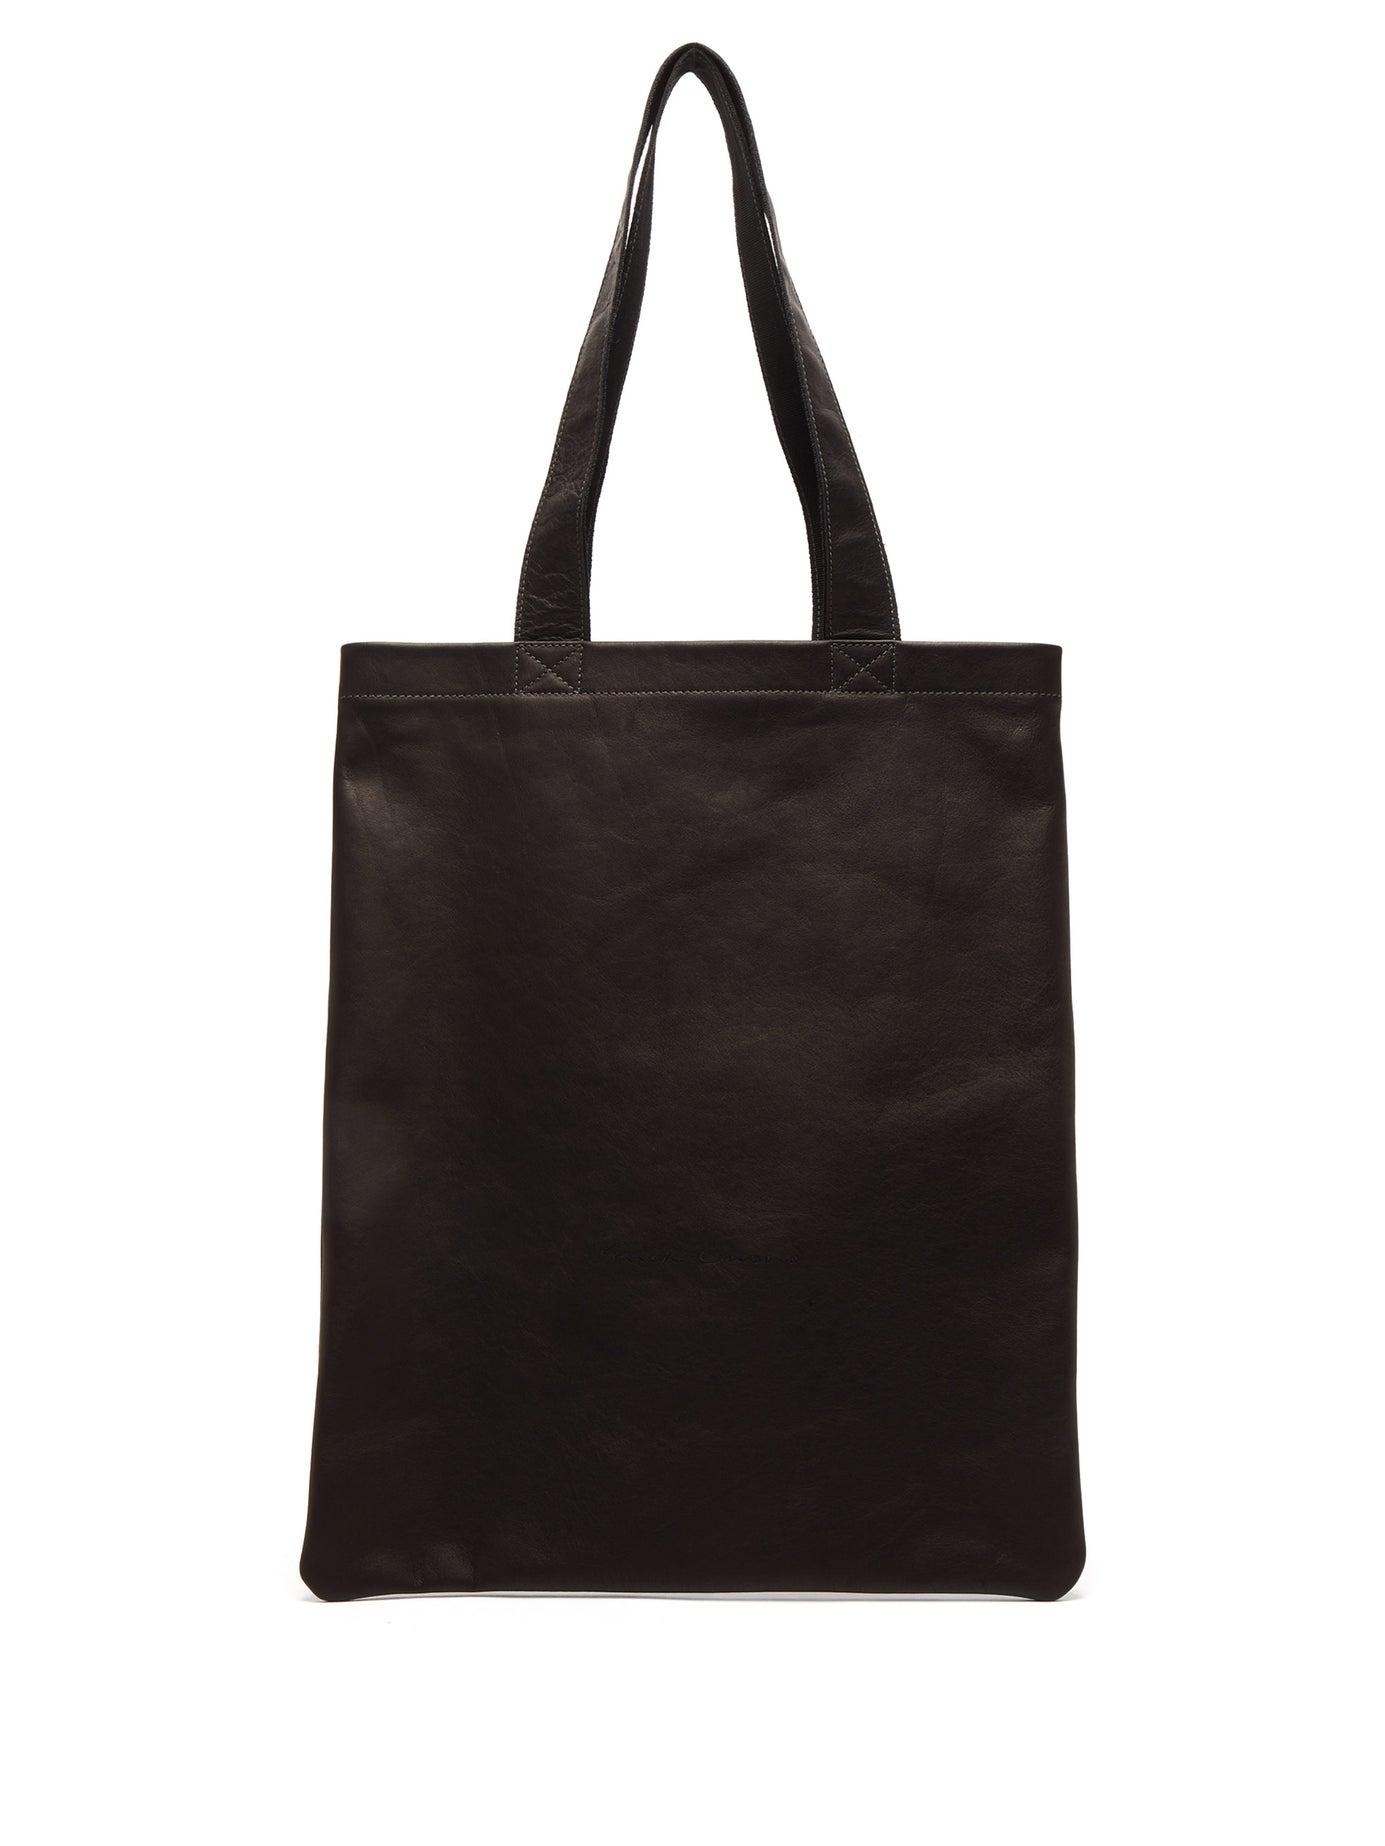 Rick Owens Black Small Signature Leather Tote Bag for Men - Save 49% - Lyst